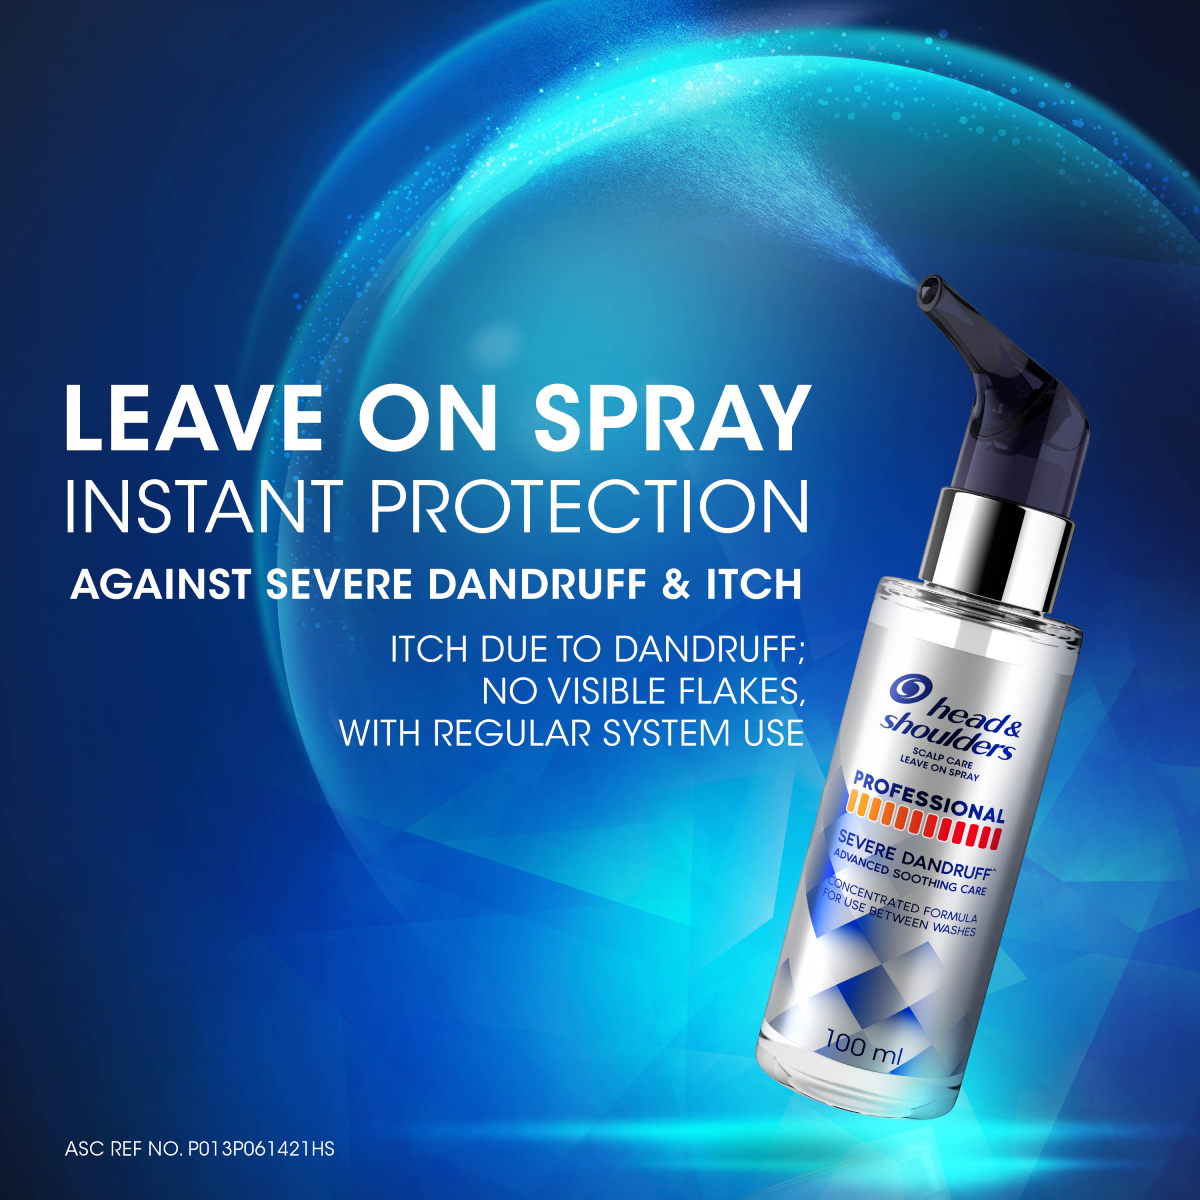 Professional Advanced Soothing Care Leave On Spray -  Head and Shoulders